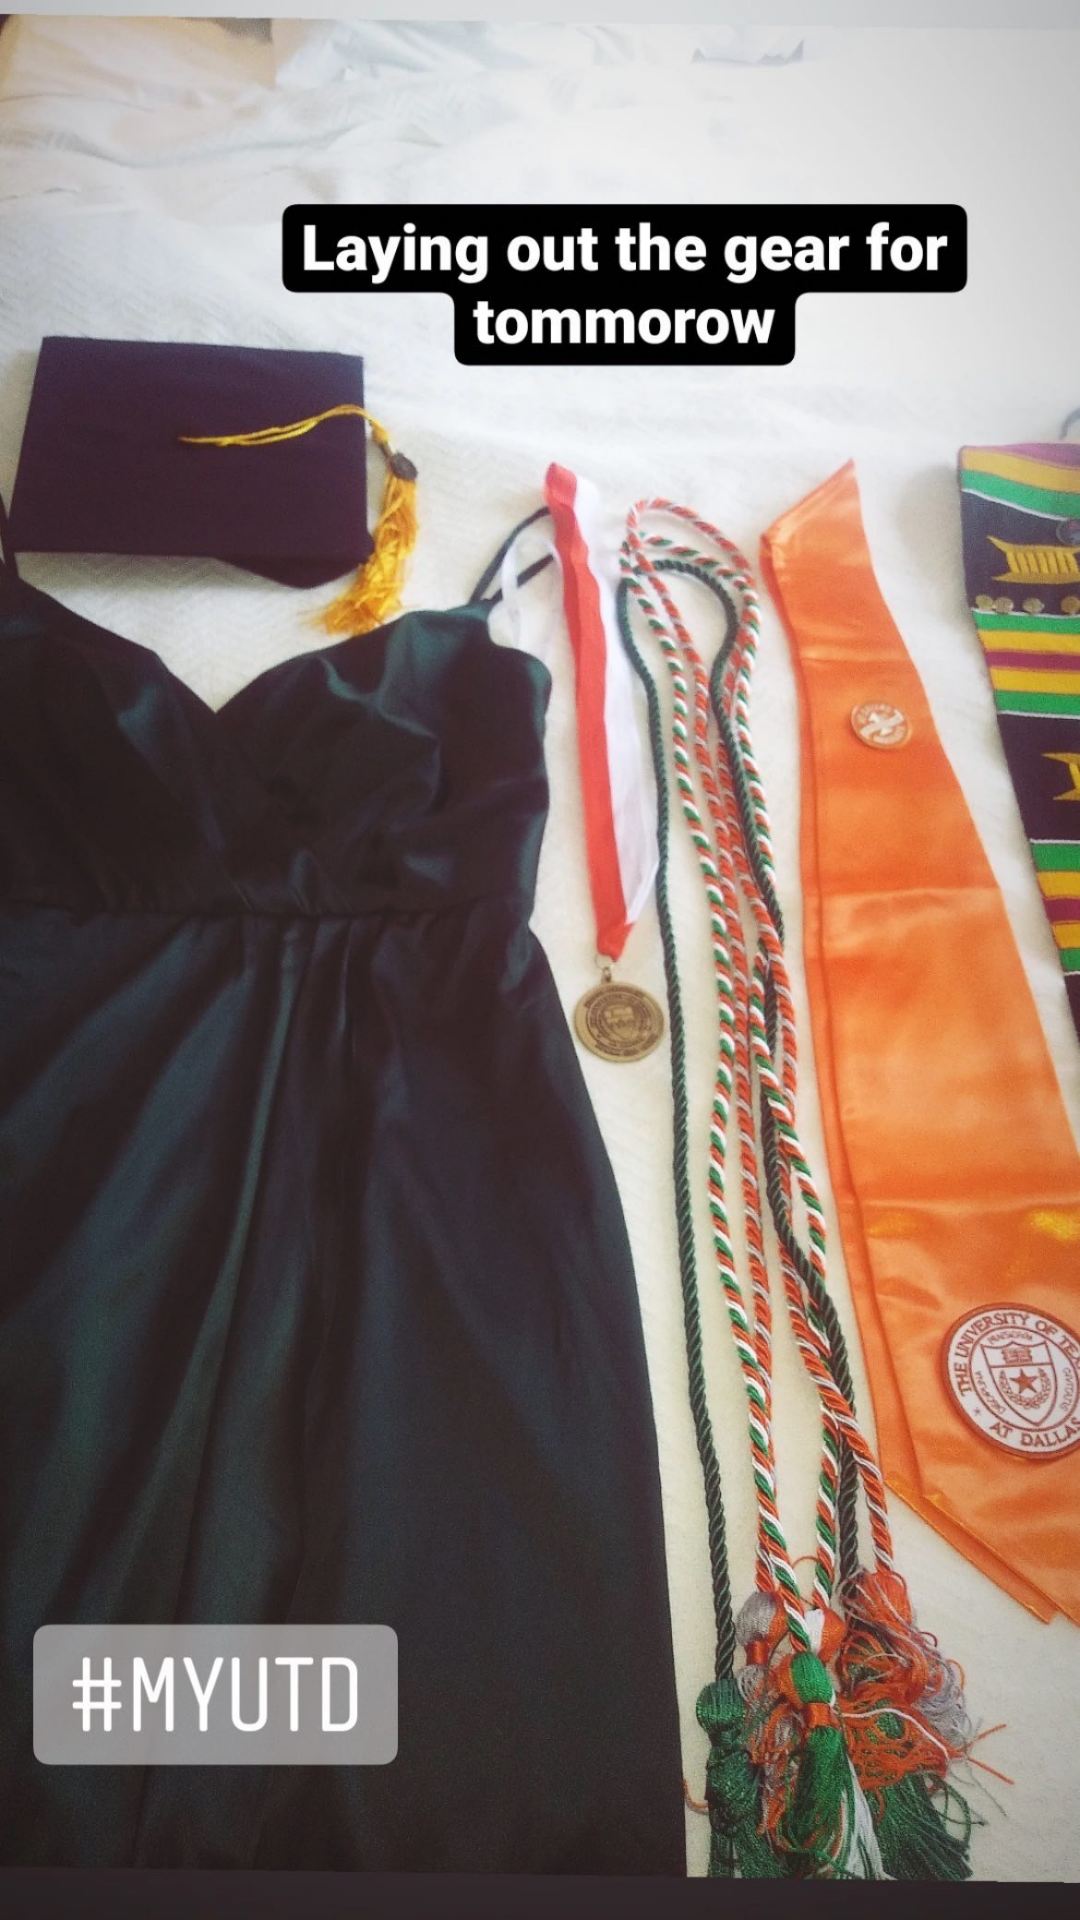 A black dress, graduation cap, and colorful sashes laid out.